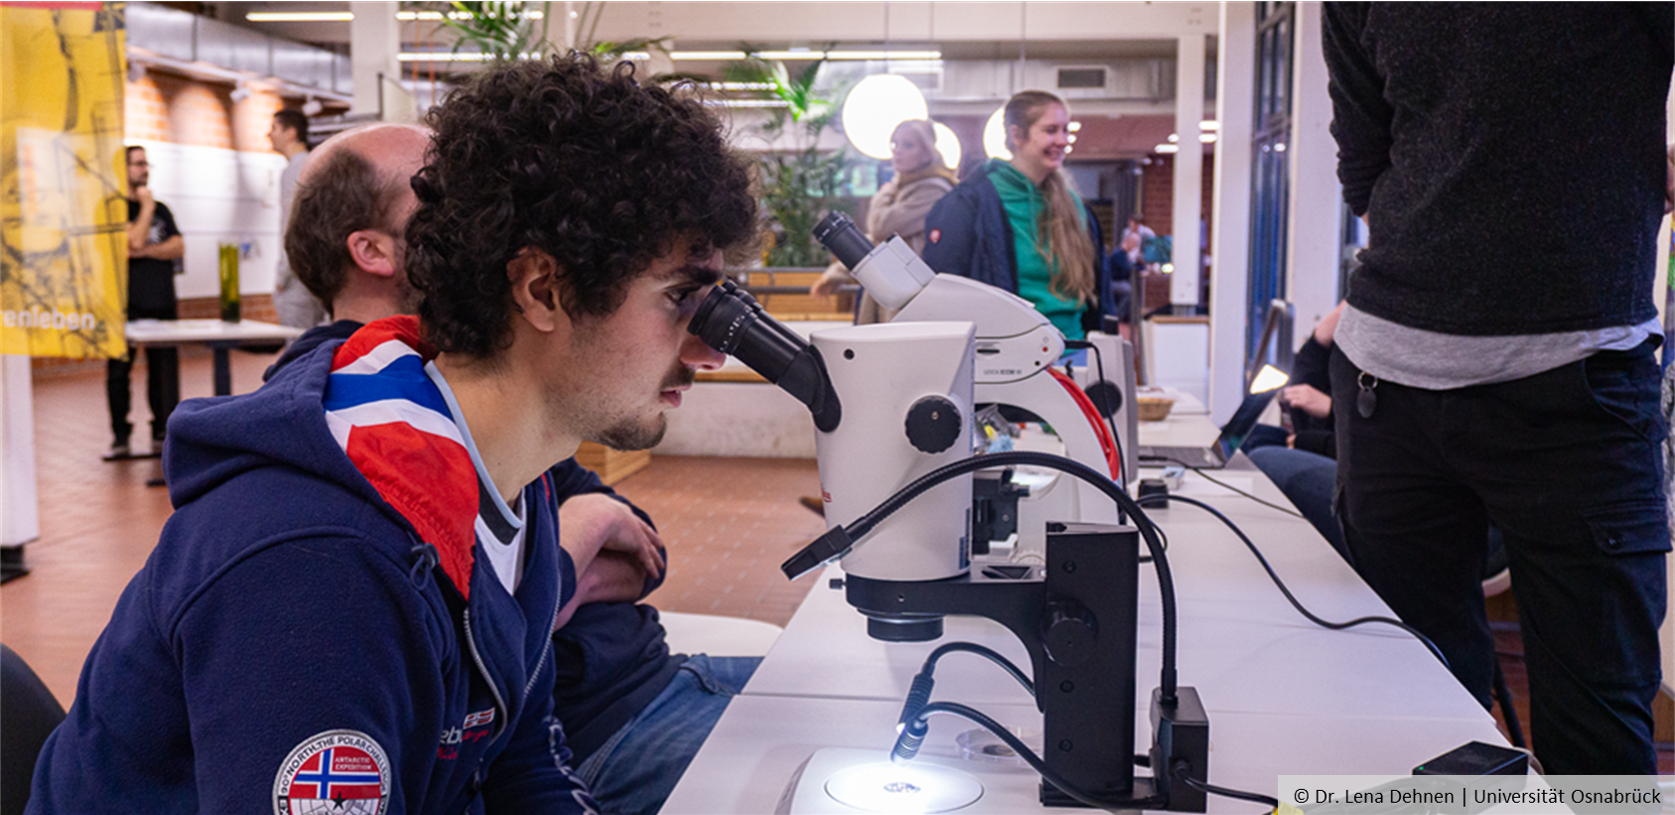 A young person looks through a microscope.